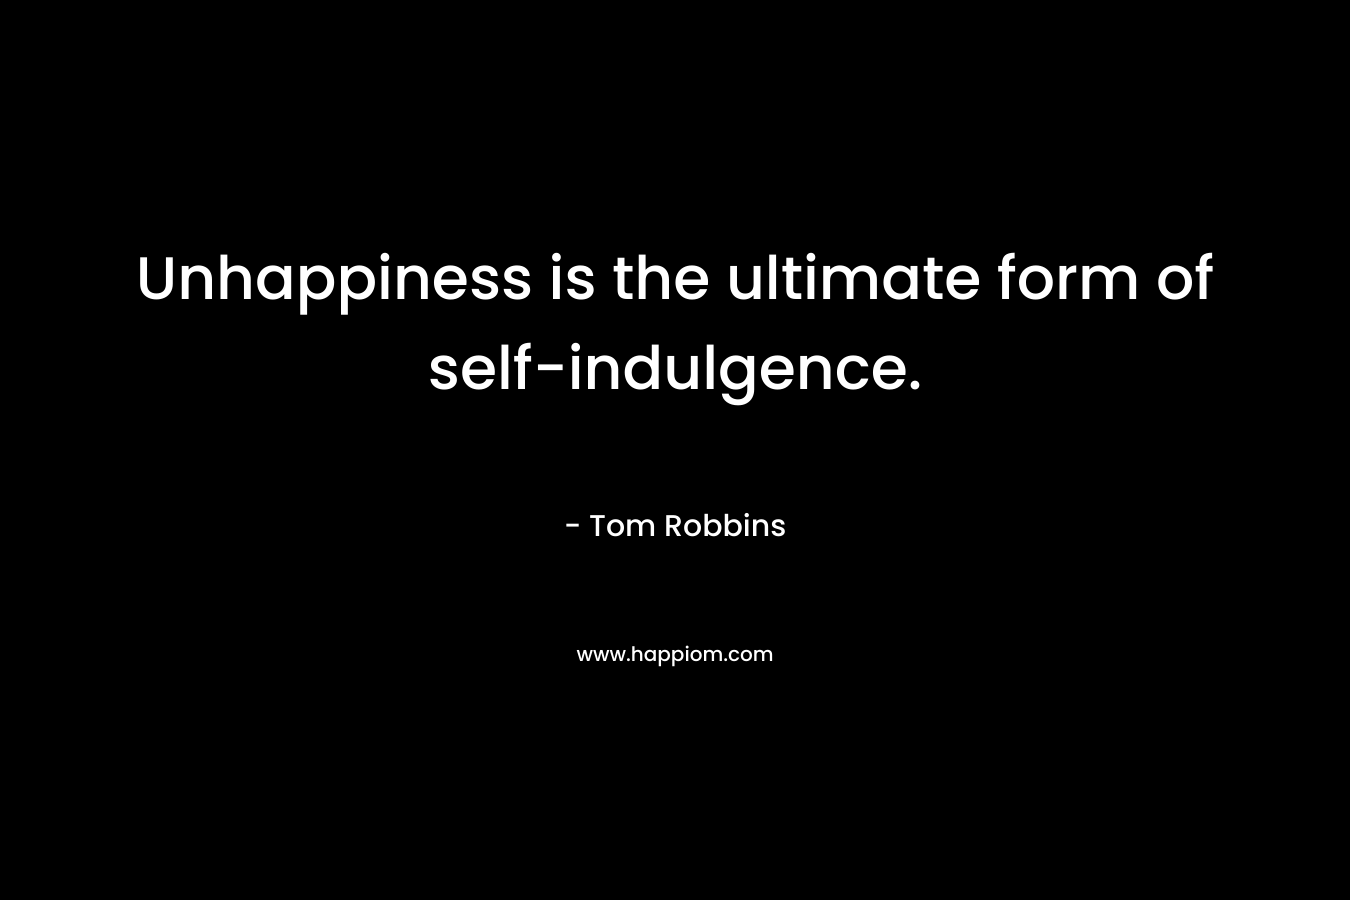 Unhappiness is the ultimate form of self-indulgence. – Tom Robbins